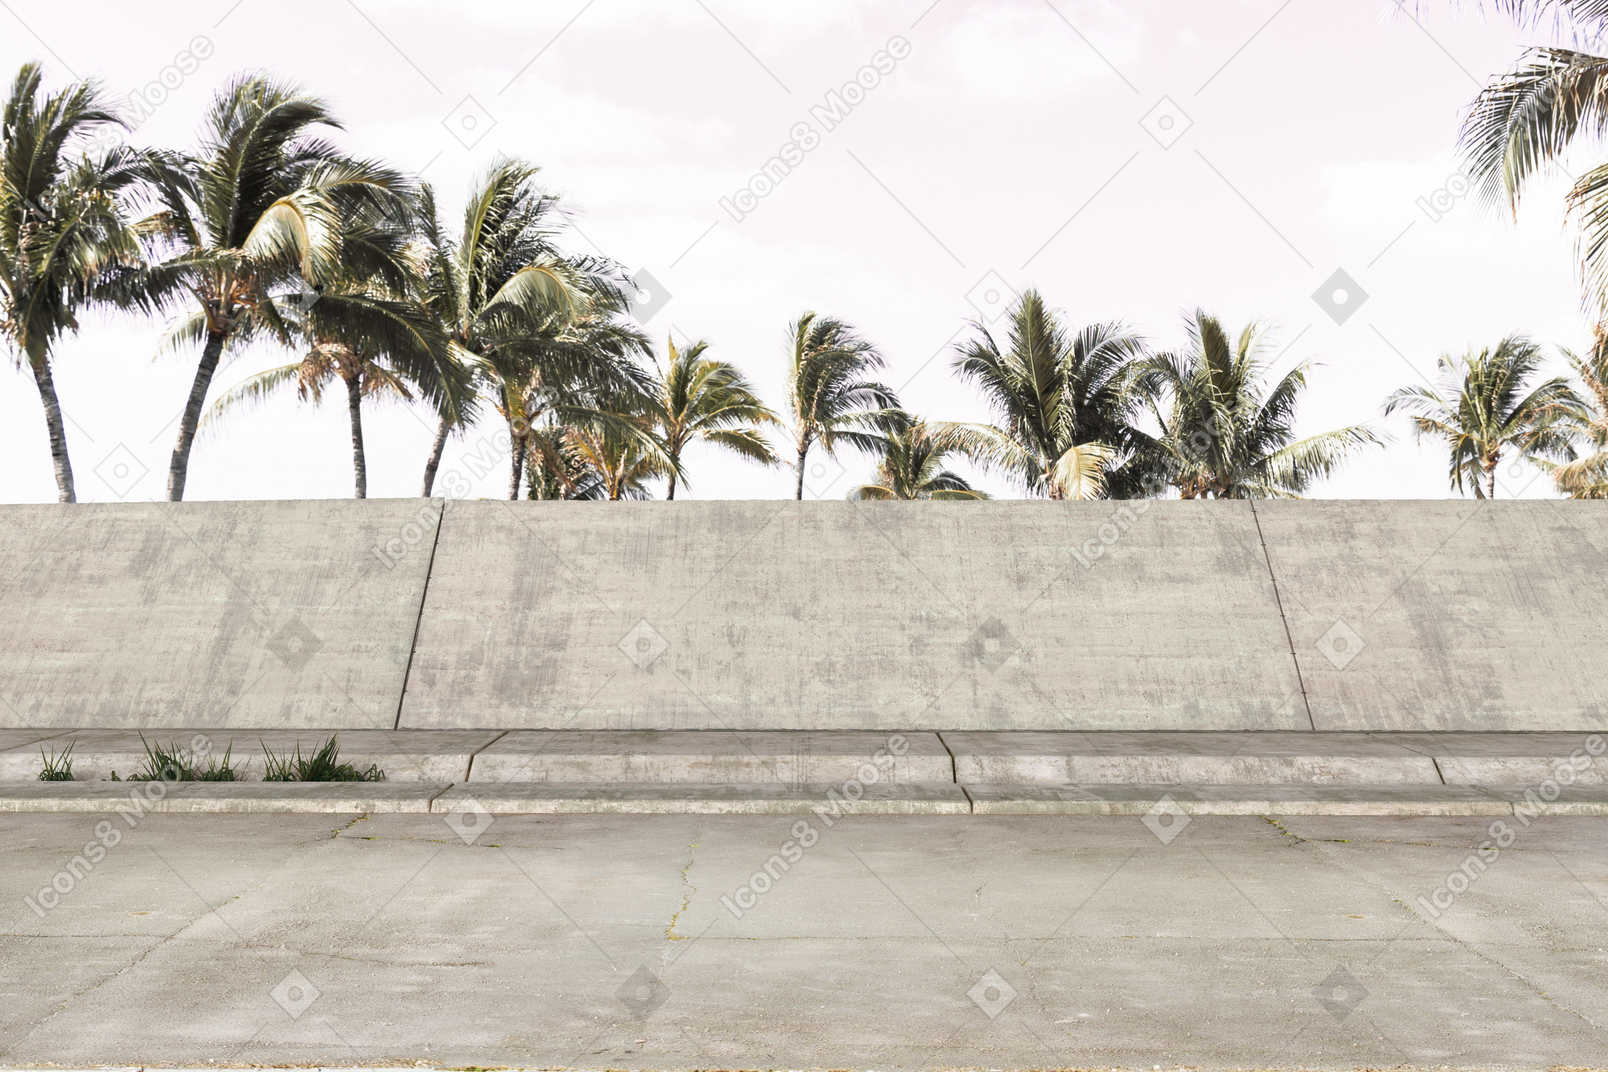 Concrete wall with palm trees in the background